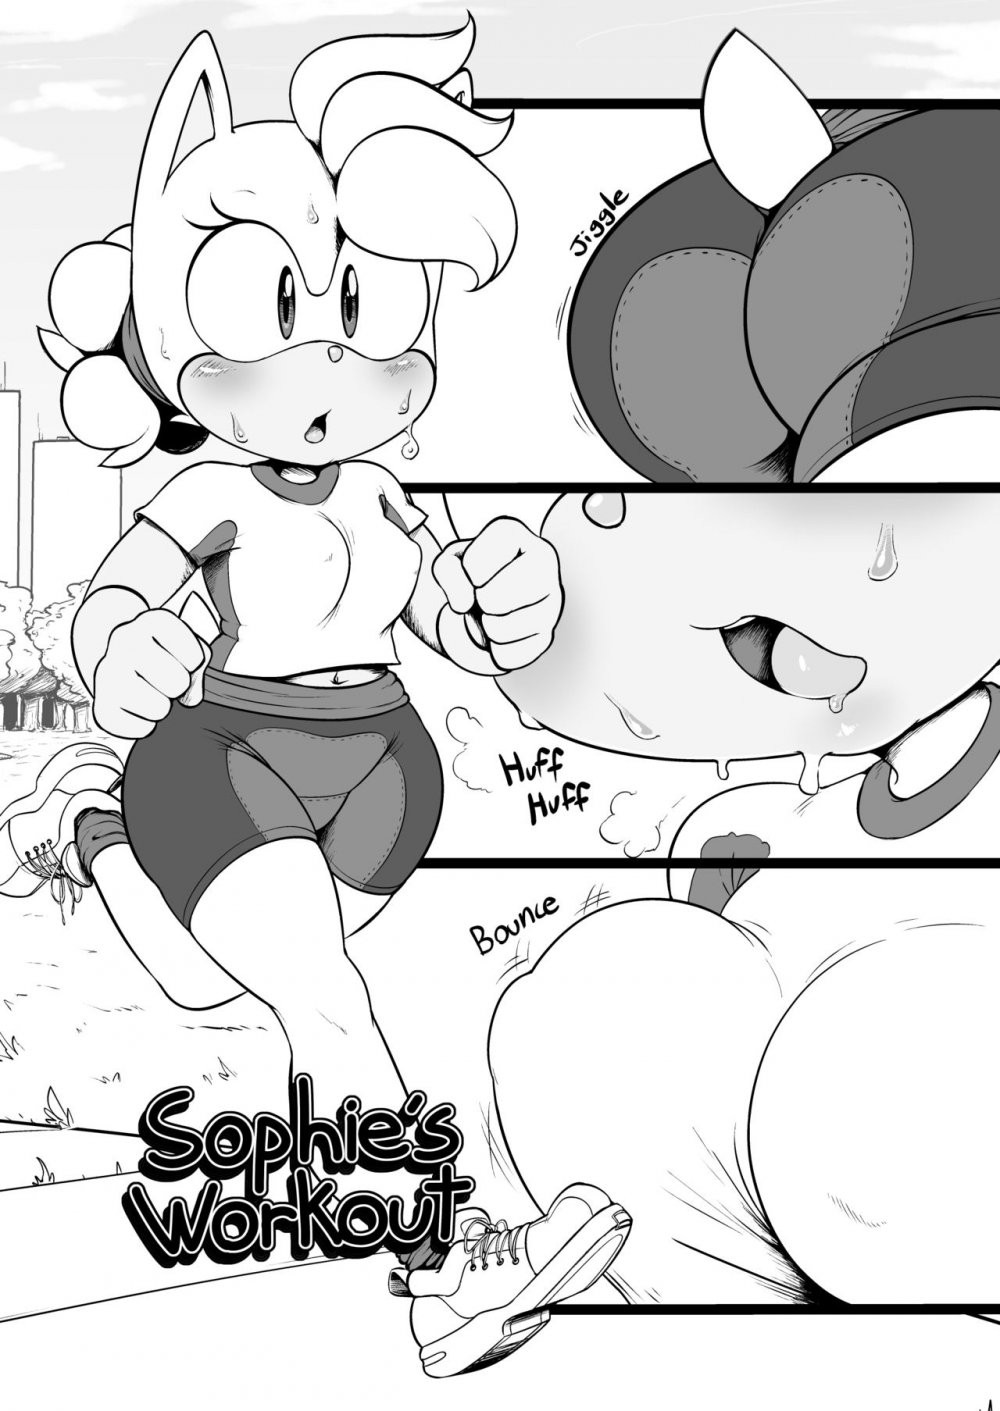 Sophie’s Workout